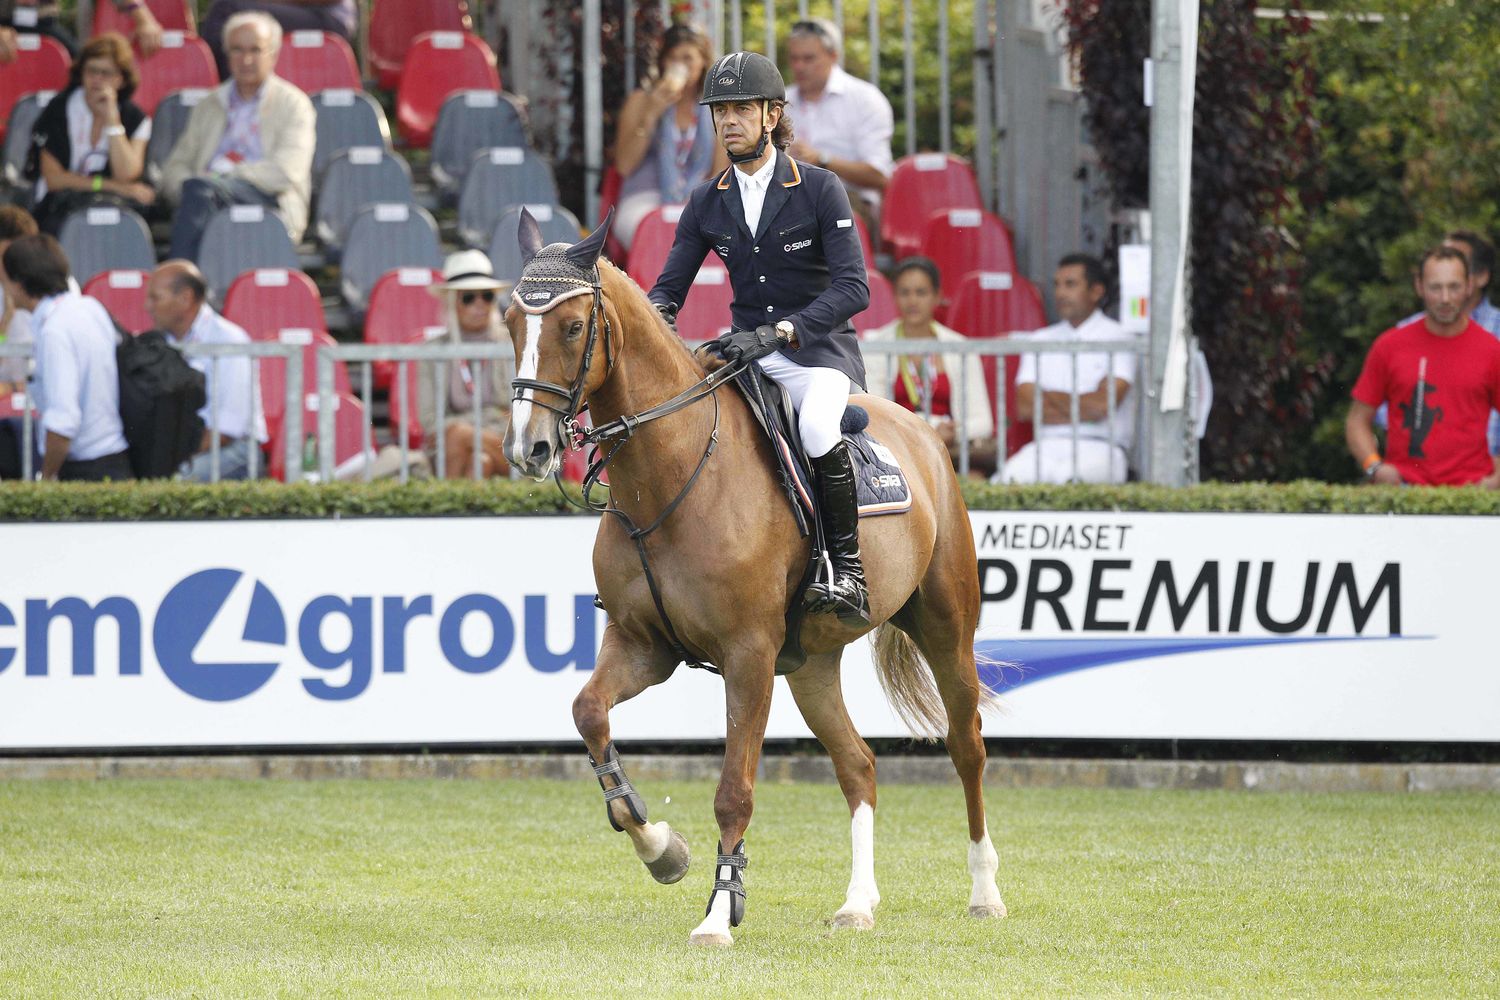 SCM GROUP SPONSOR OF THE HORSE COMPETITION AT SAN PATRIGNANO